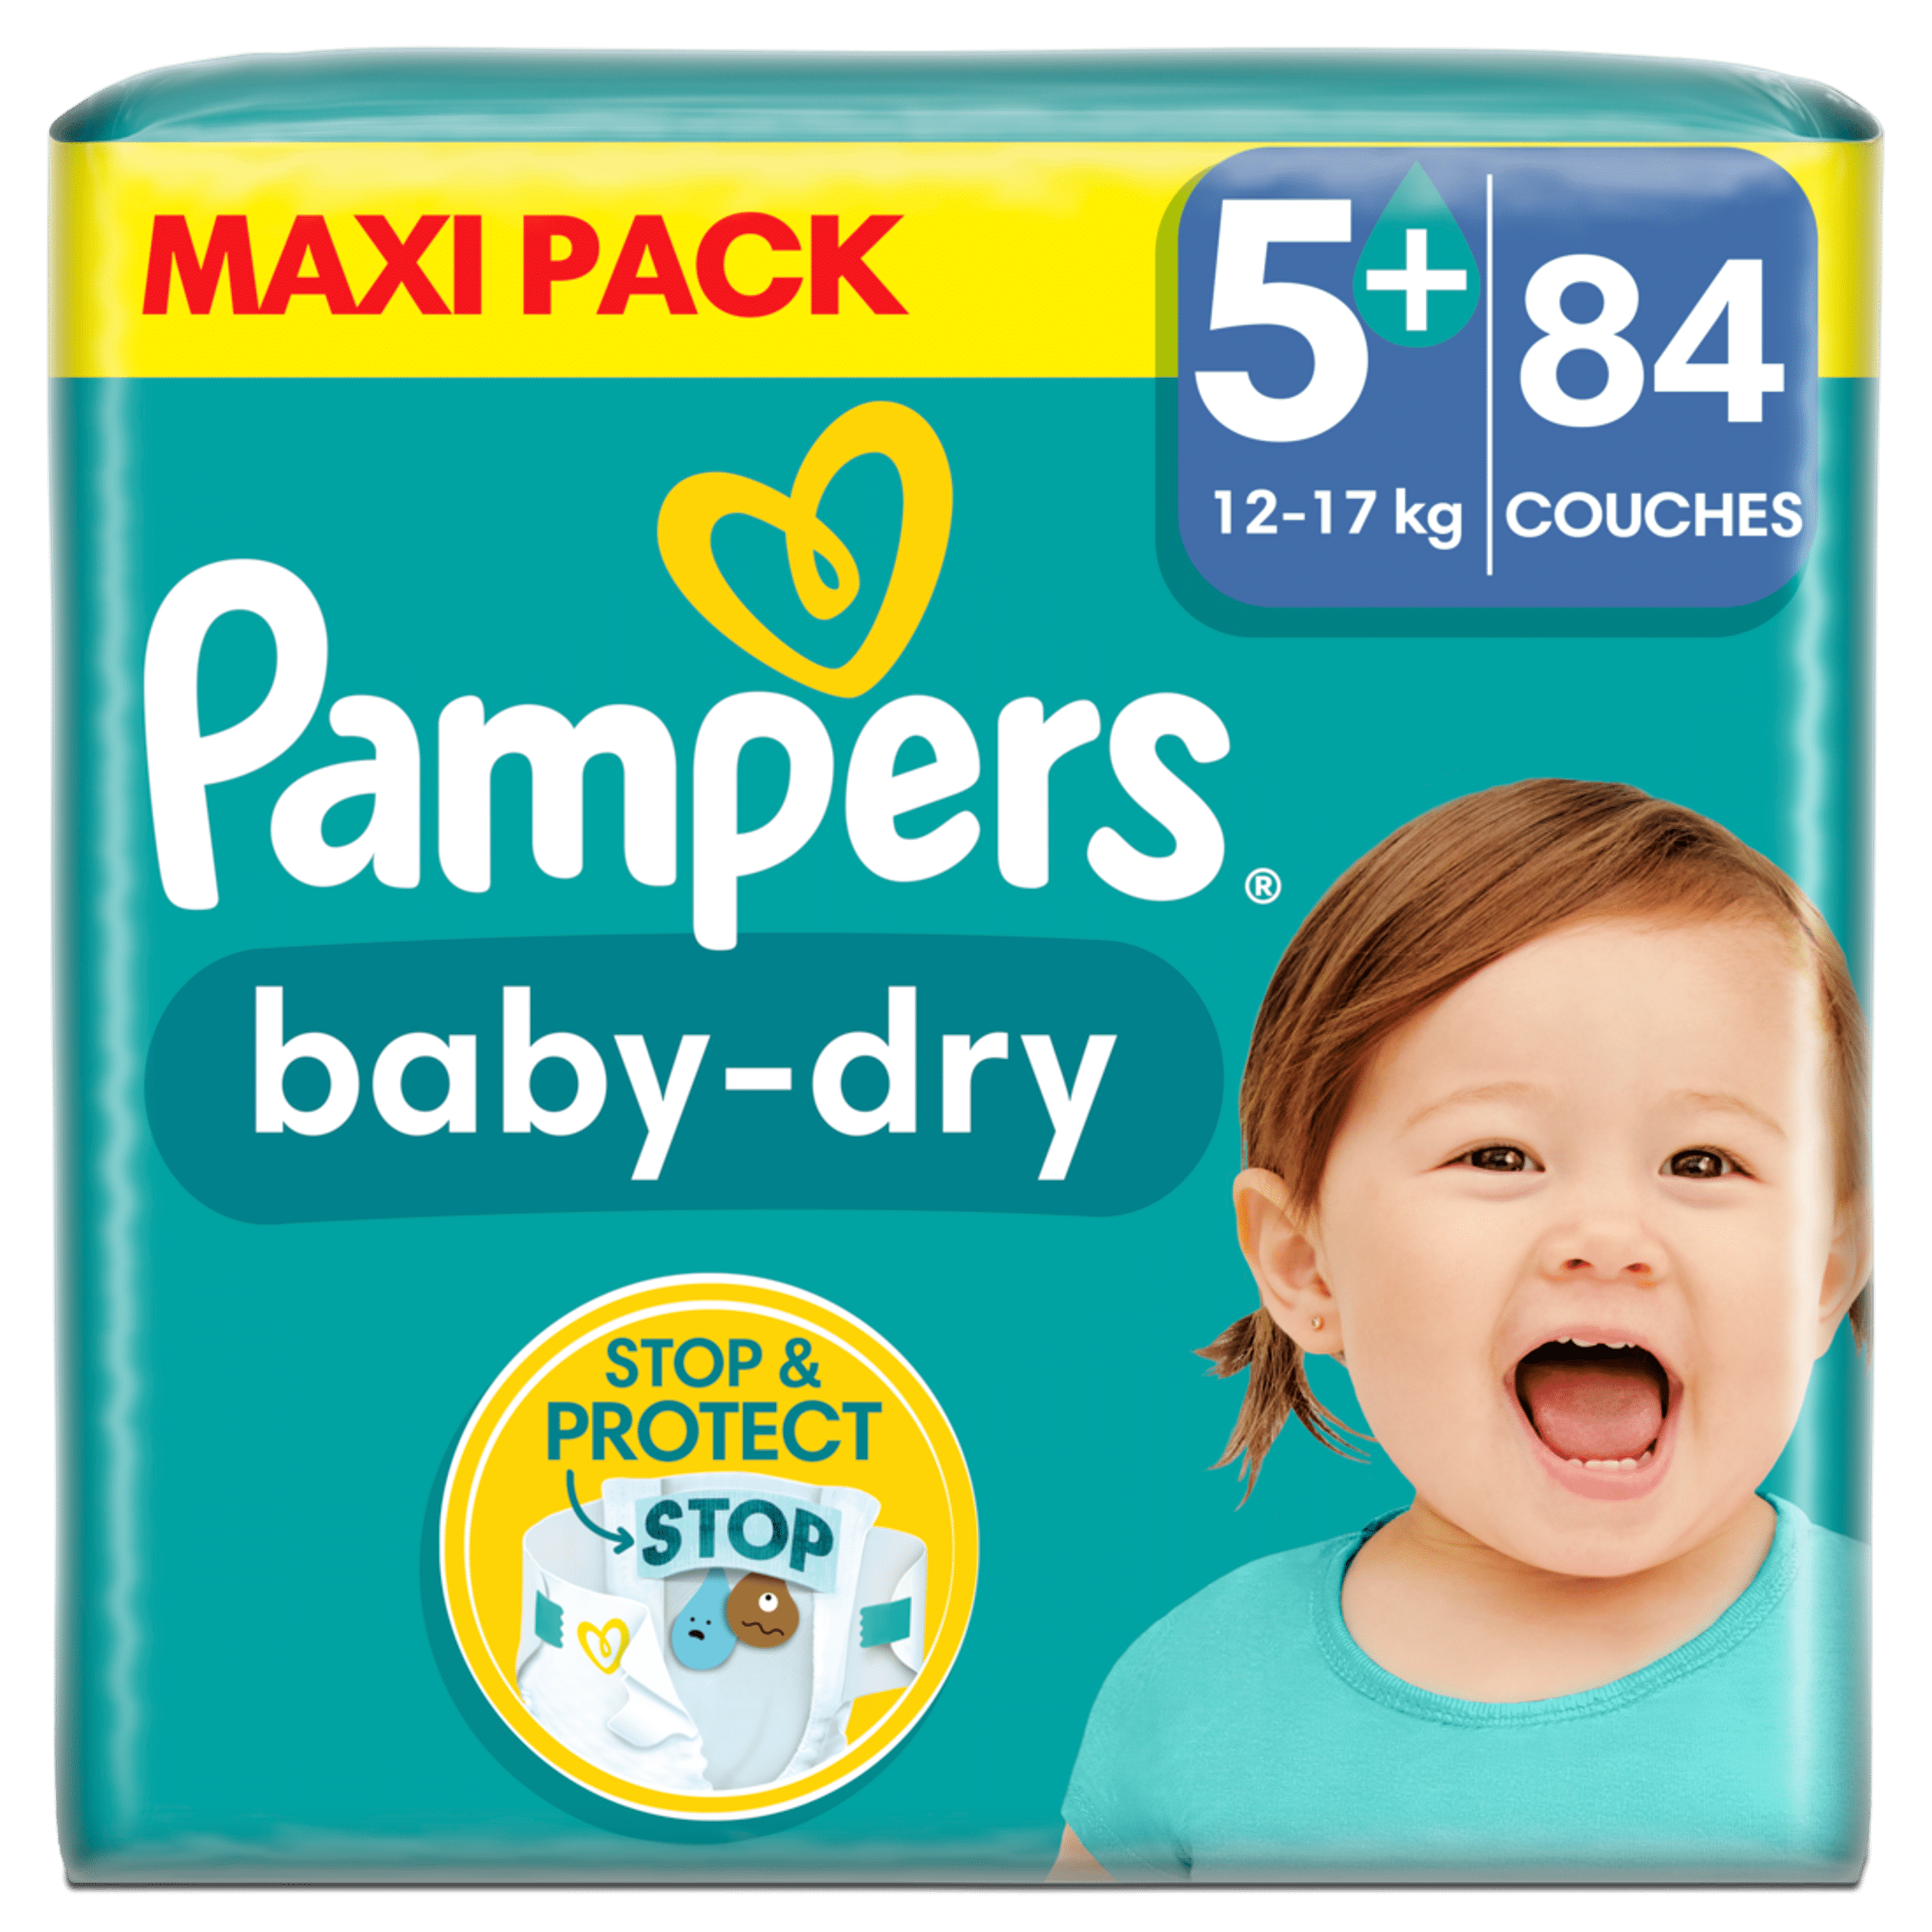 pampers maxi pack 5